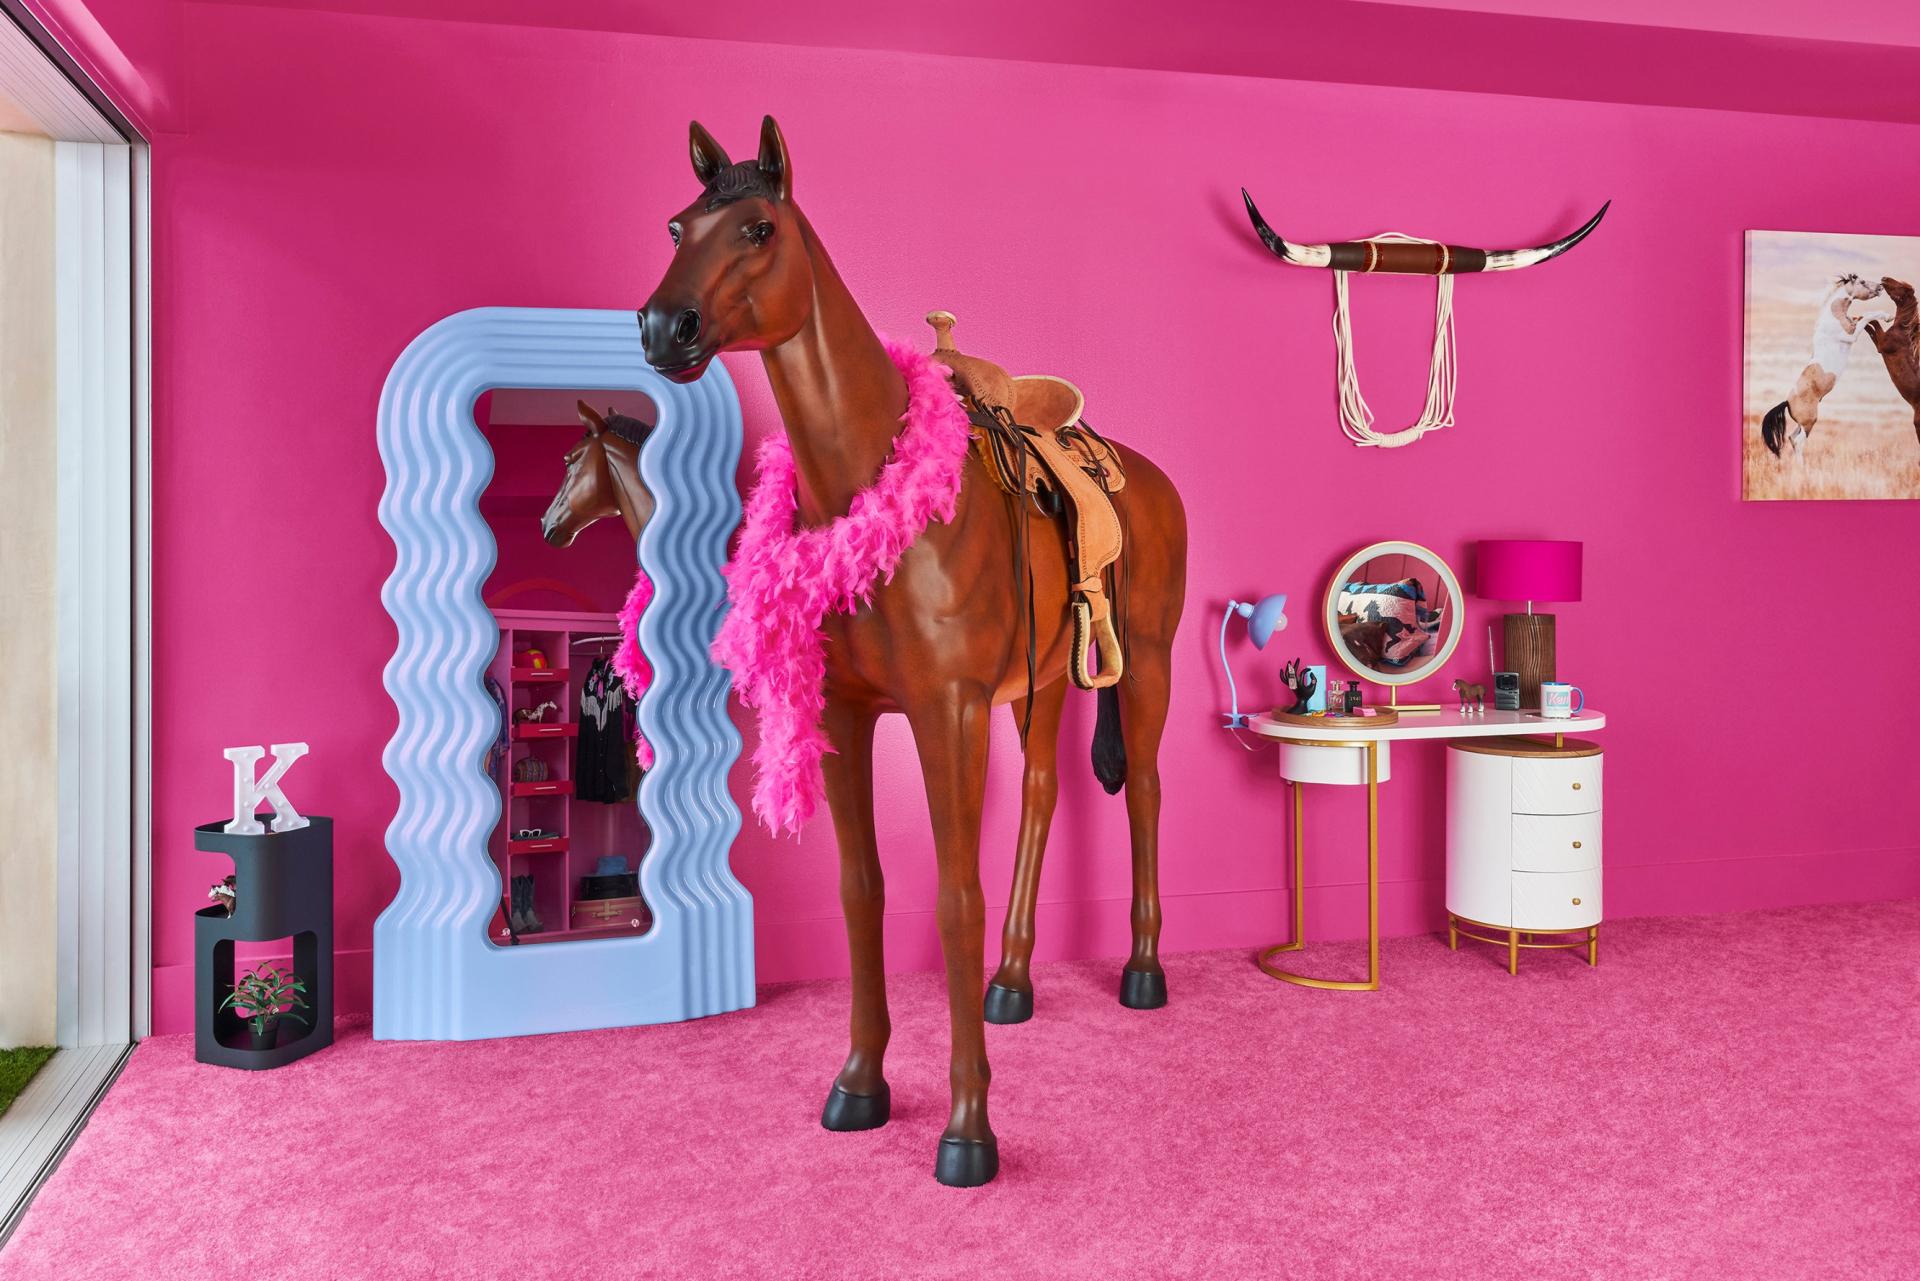 Can't Get Enough of Barbie? Here's How to Create Your Own Barbiecore Dreamhouse